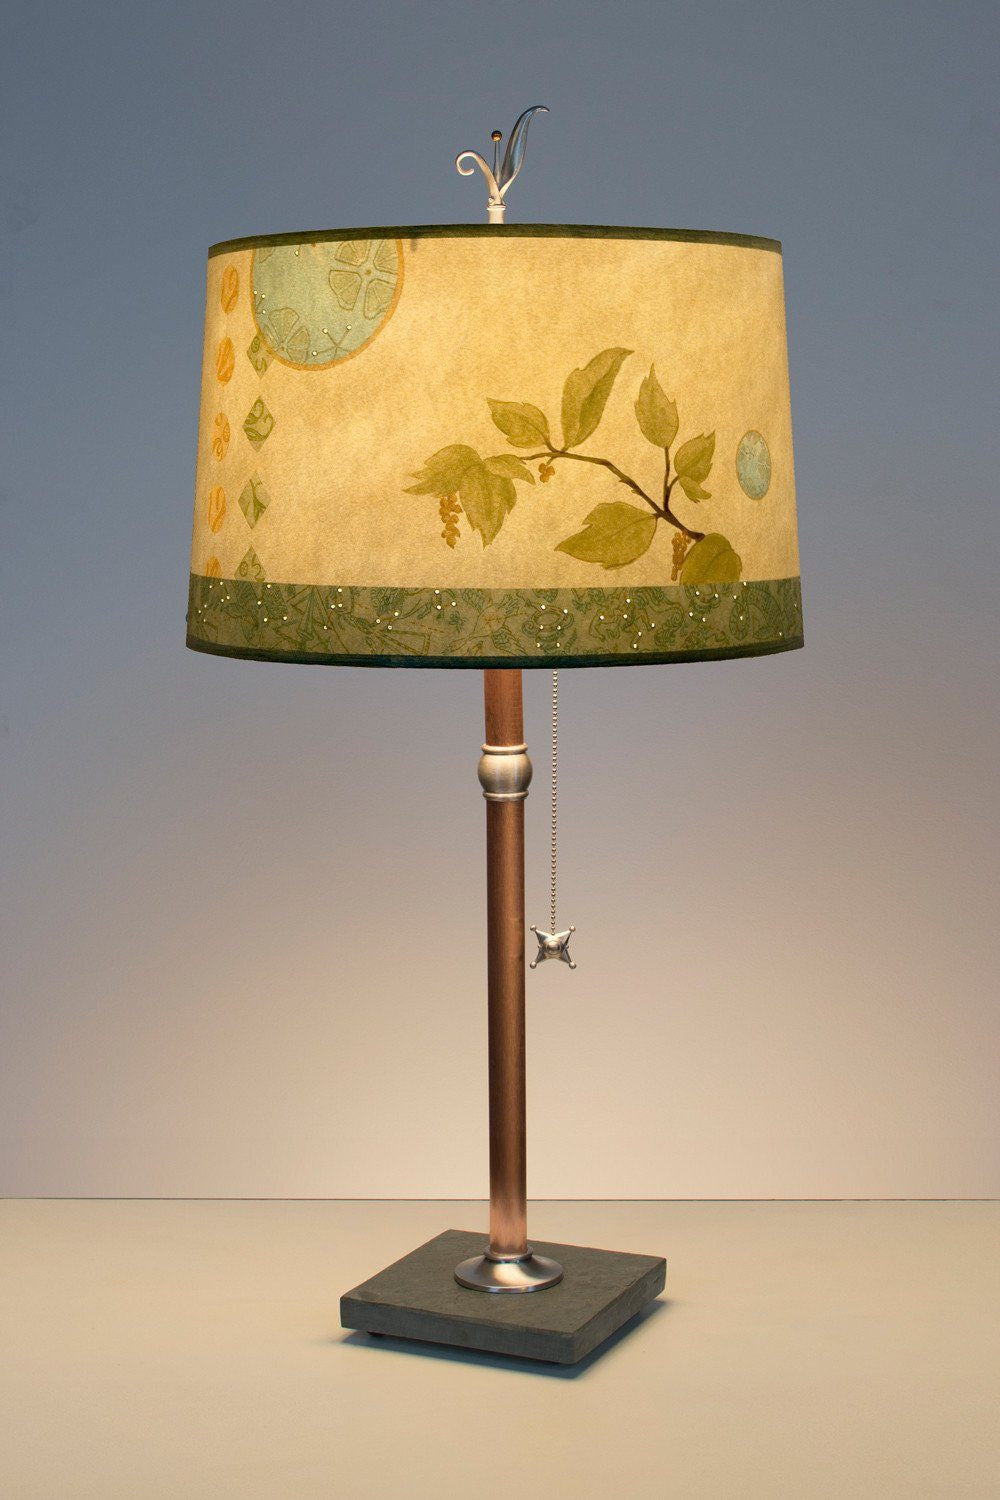 Janna Ugone &amp; Co Table Lamps Copper Table Lamp with Large Drum Shade in Celestial Leaf